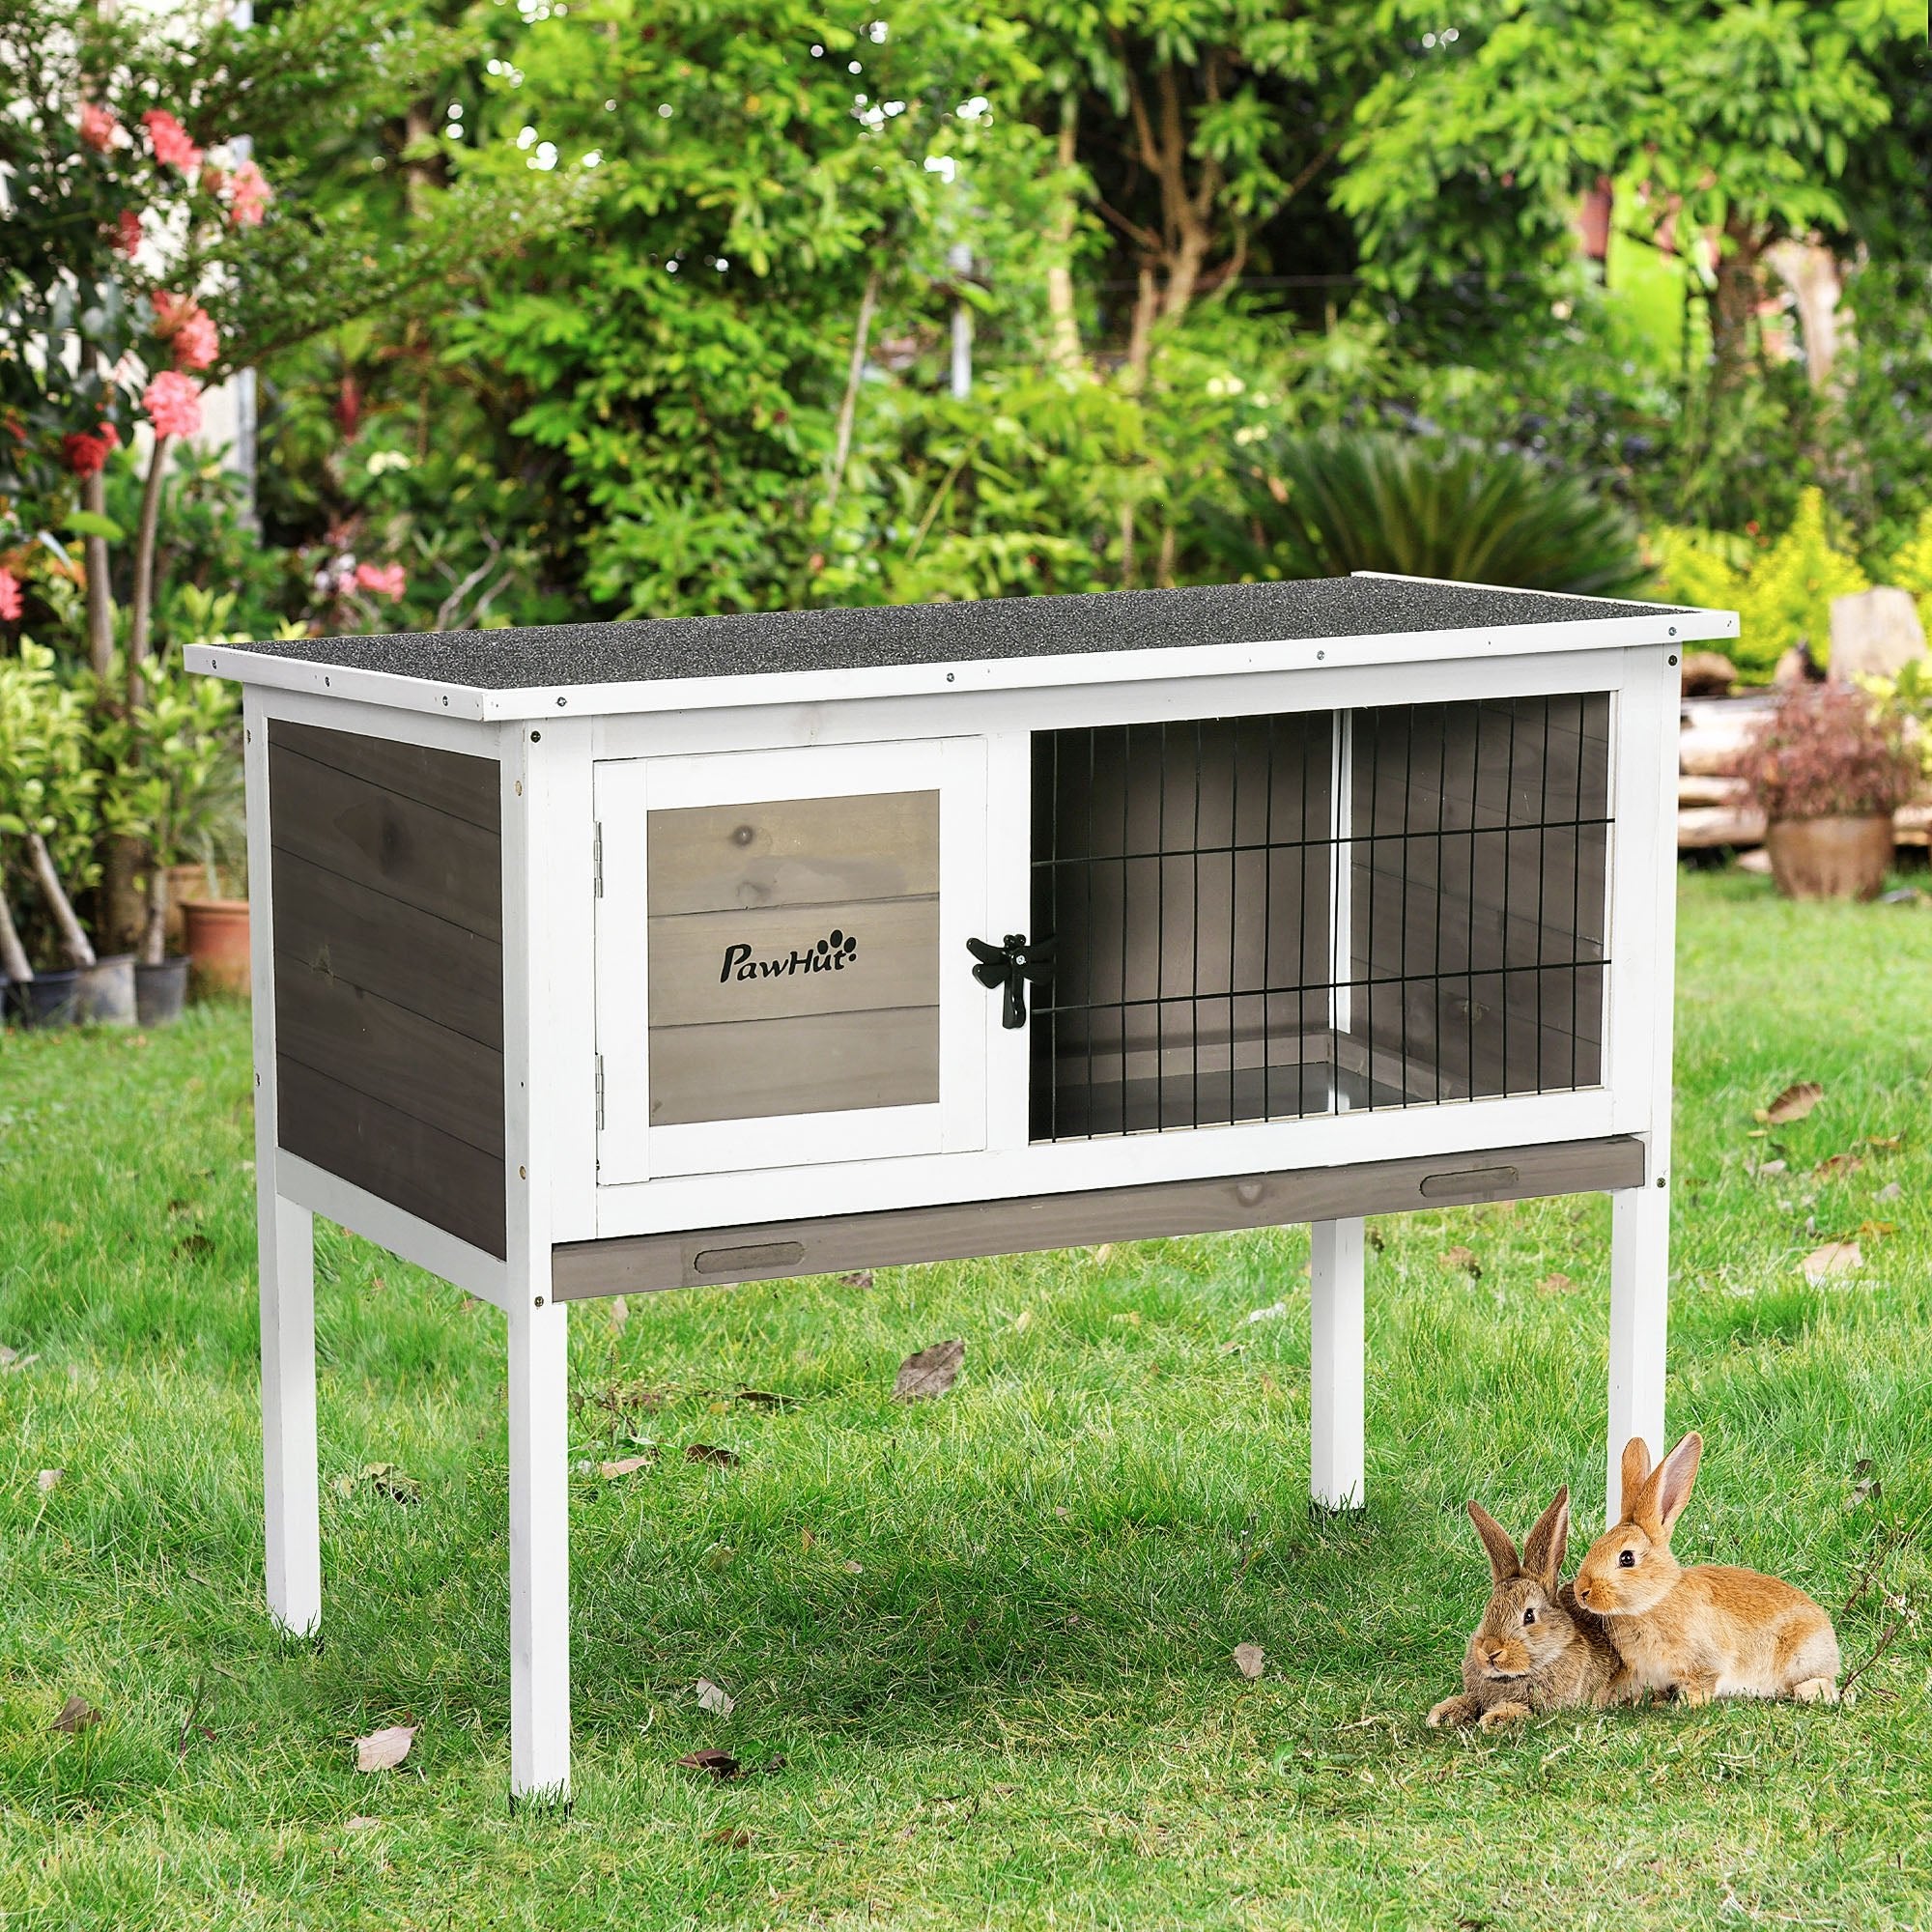 PawHut Elevated Rabbit Hutch Bunny Hutch with Hinged Asphalt Roof, Removable Tray, Fir Wood Bunny Cage for Indoor/Outdoor, Brown